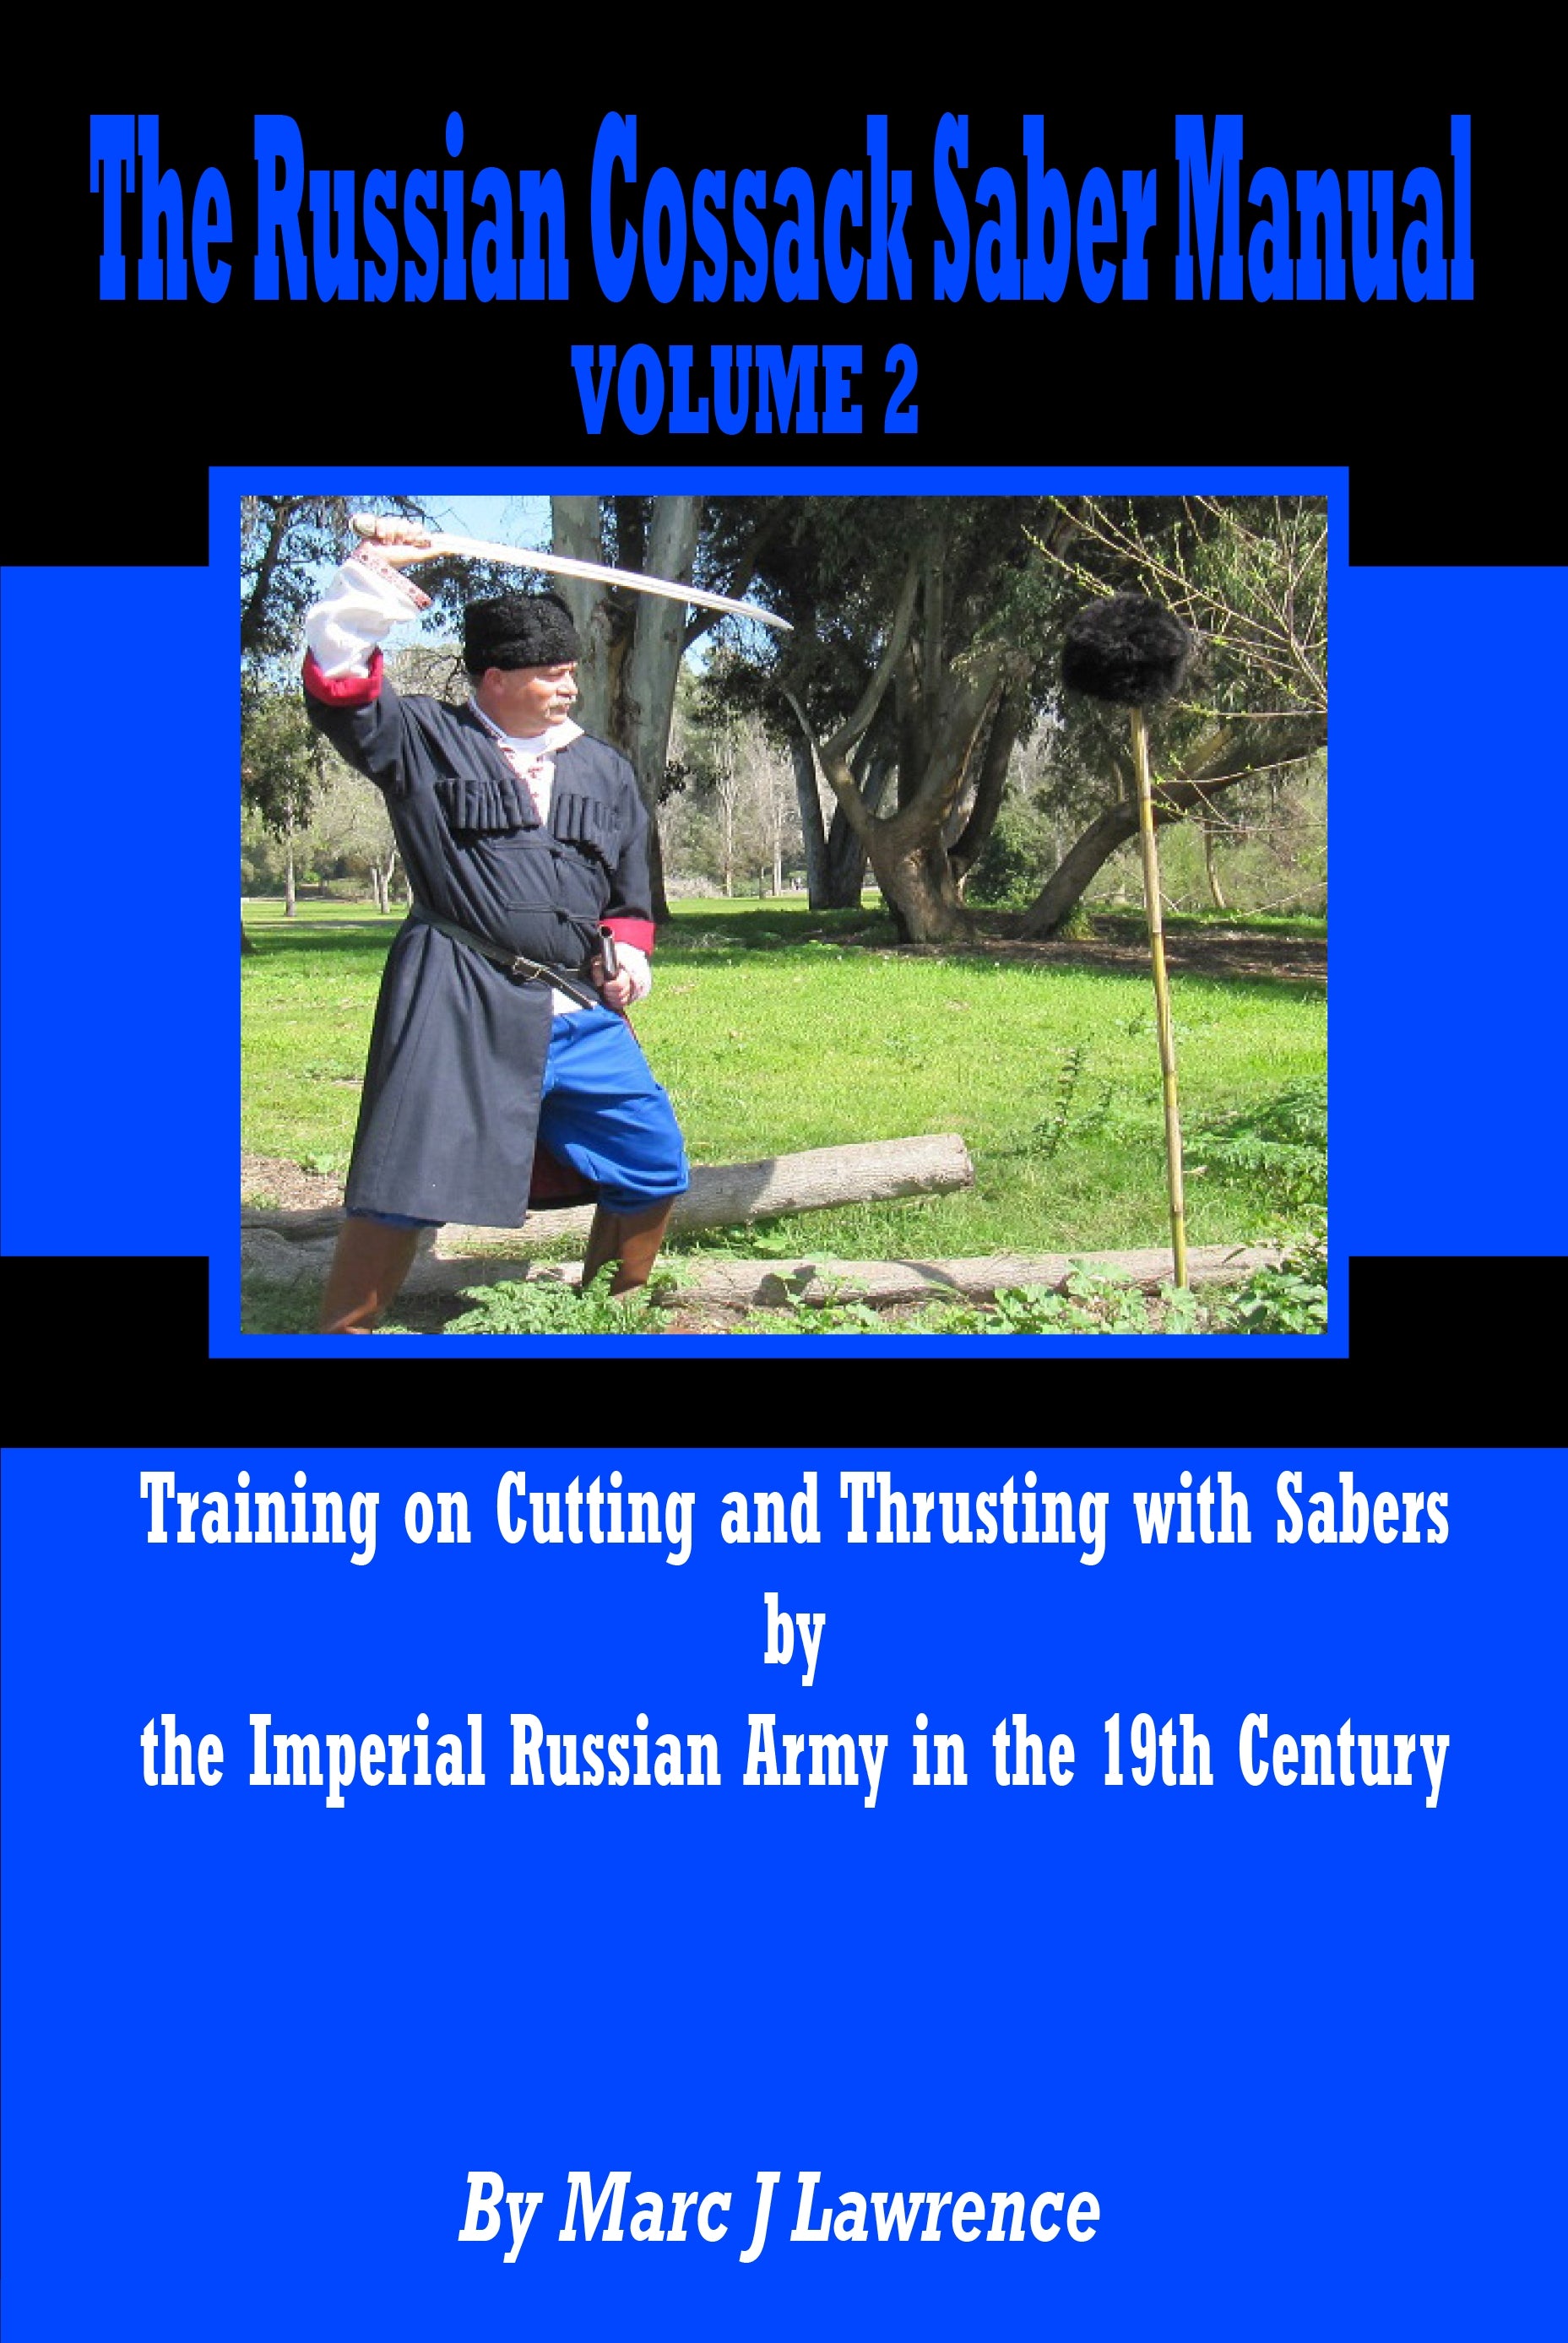 Russian Cossack Saber Manual: Cutting & Thrusting with Sabers #2 Book by Marc Lawrence